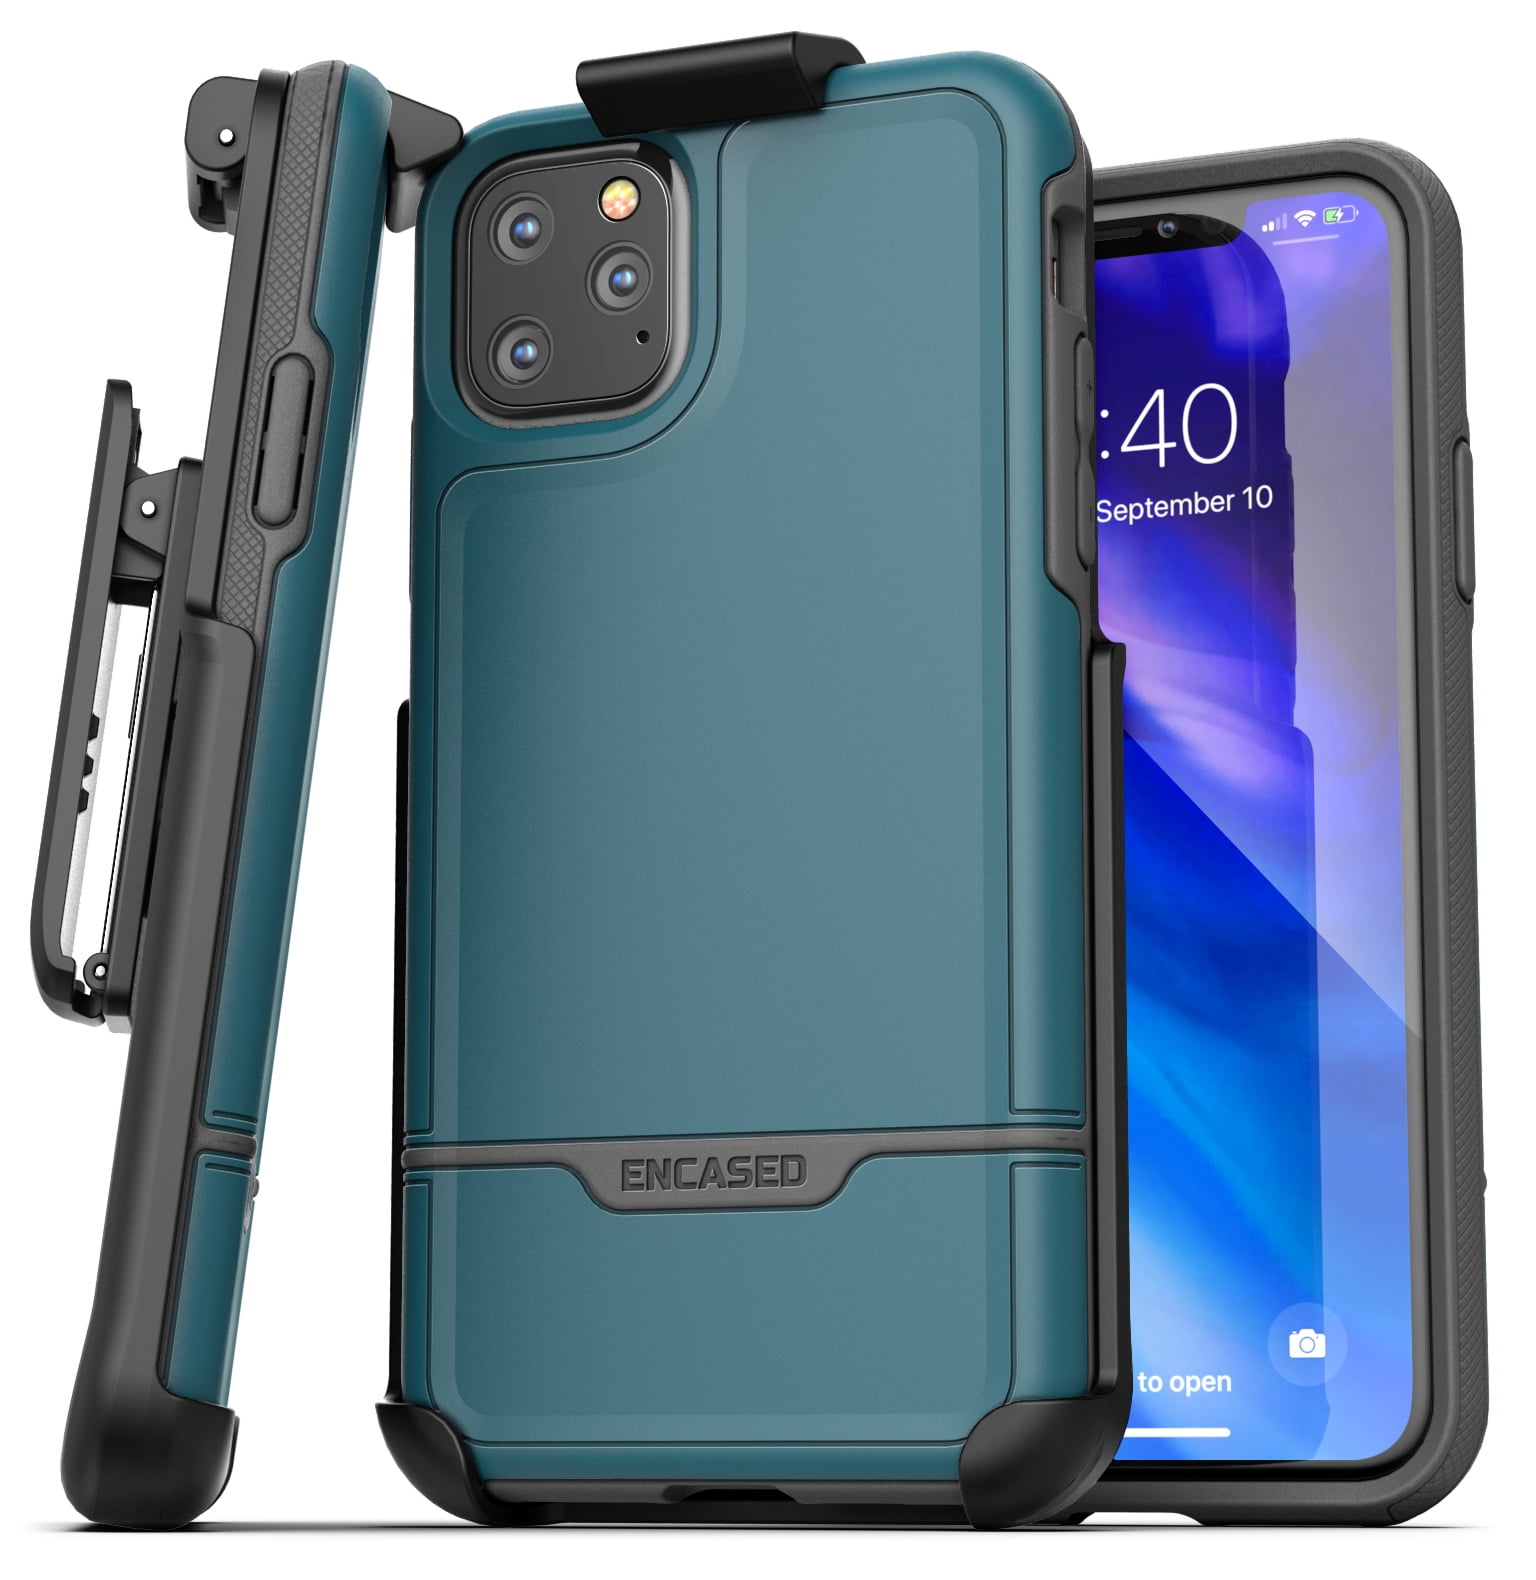 2019 Rebel Armor Heavy Duty Protective Full Body Rugged Cover with Holder Camo Green Encased iPhone 11 Pro Max Belt Clip Holster Case